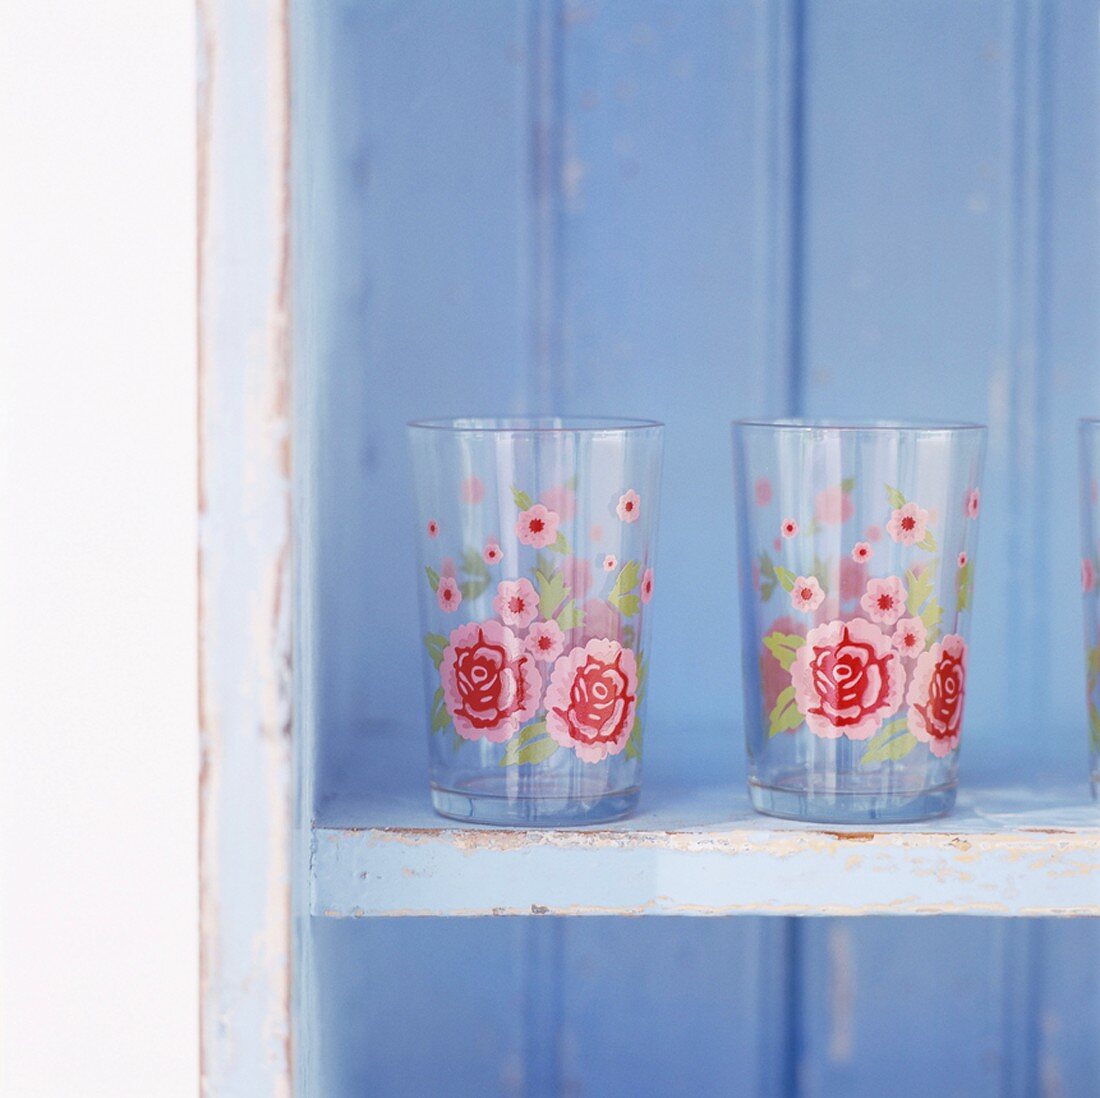 Glasses painted with flowers